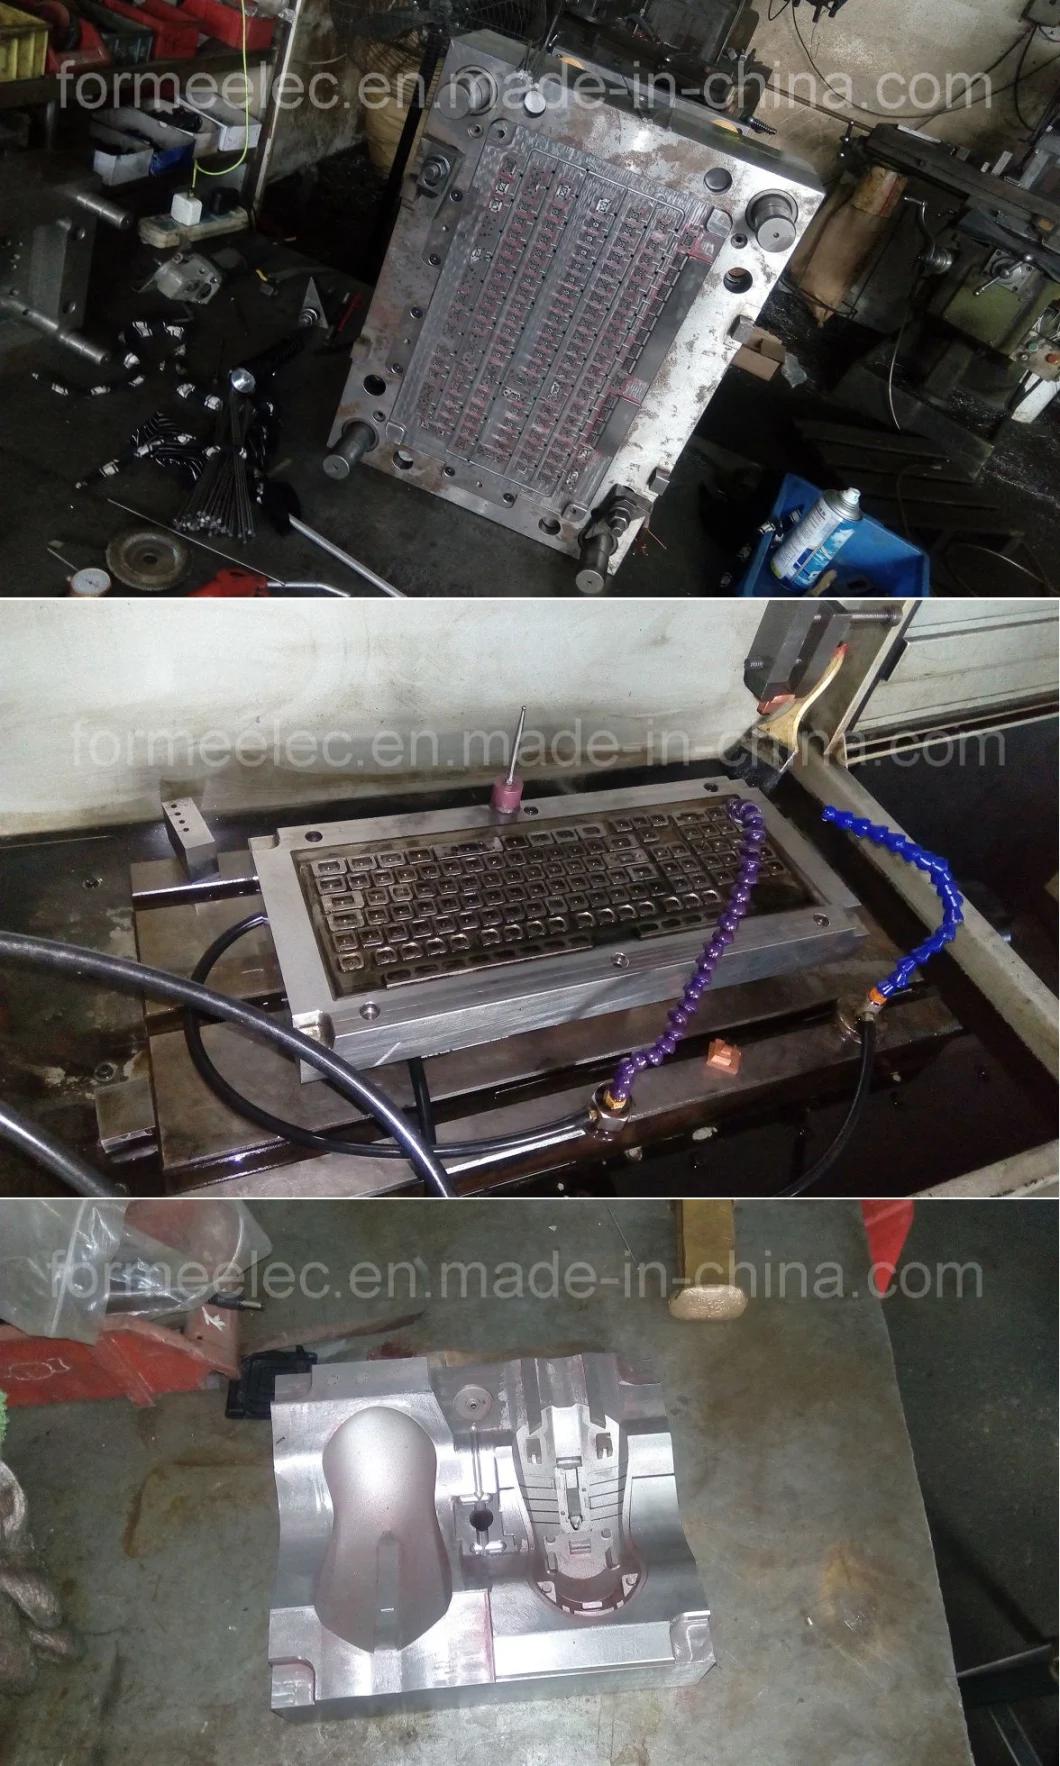 Keyboard Design Injection Mold Toolings Manufacture 3D Print Computer Keyboard Phototype